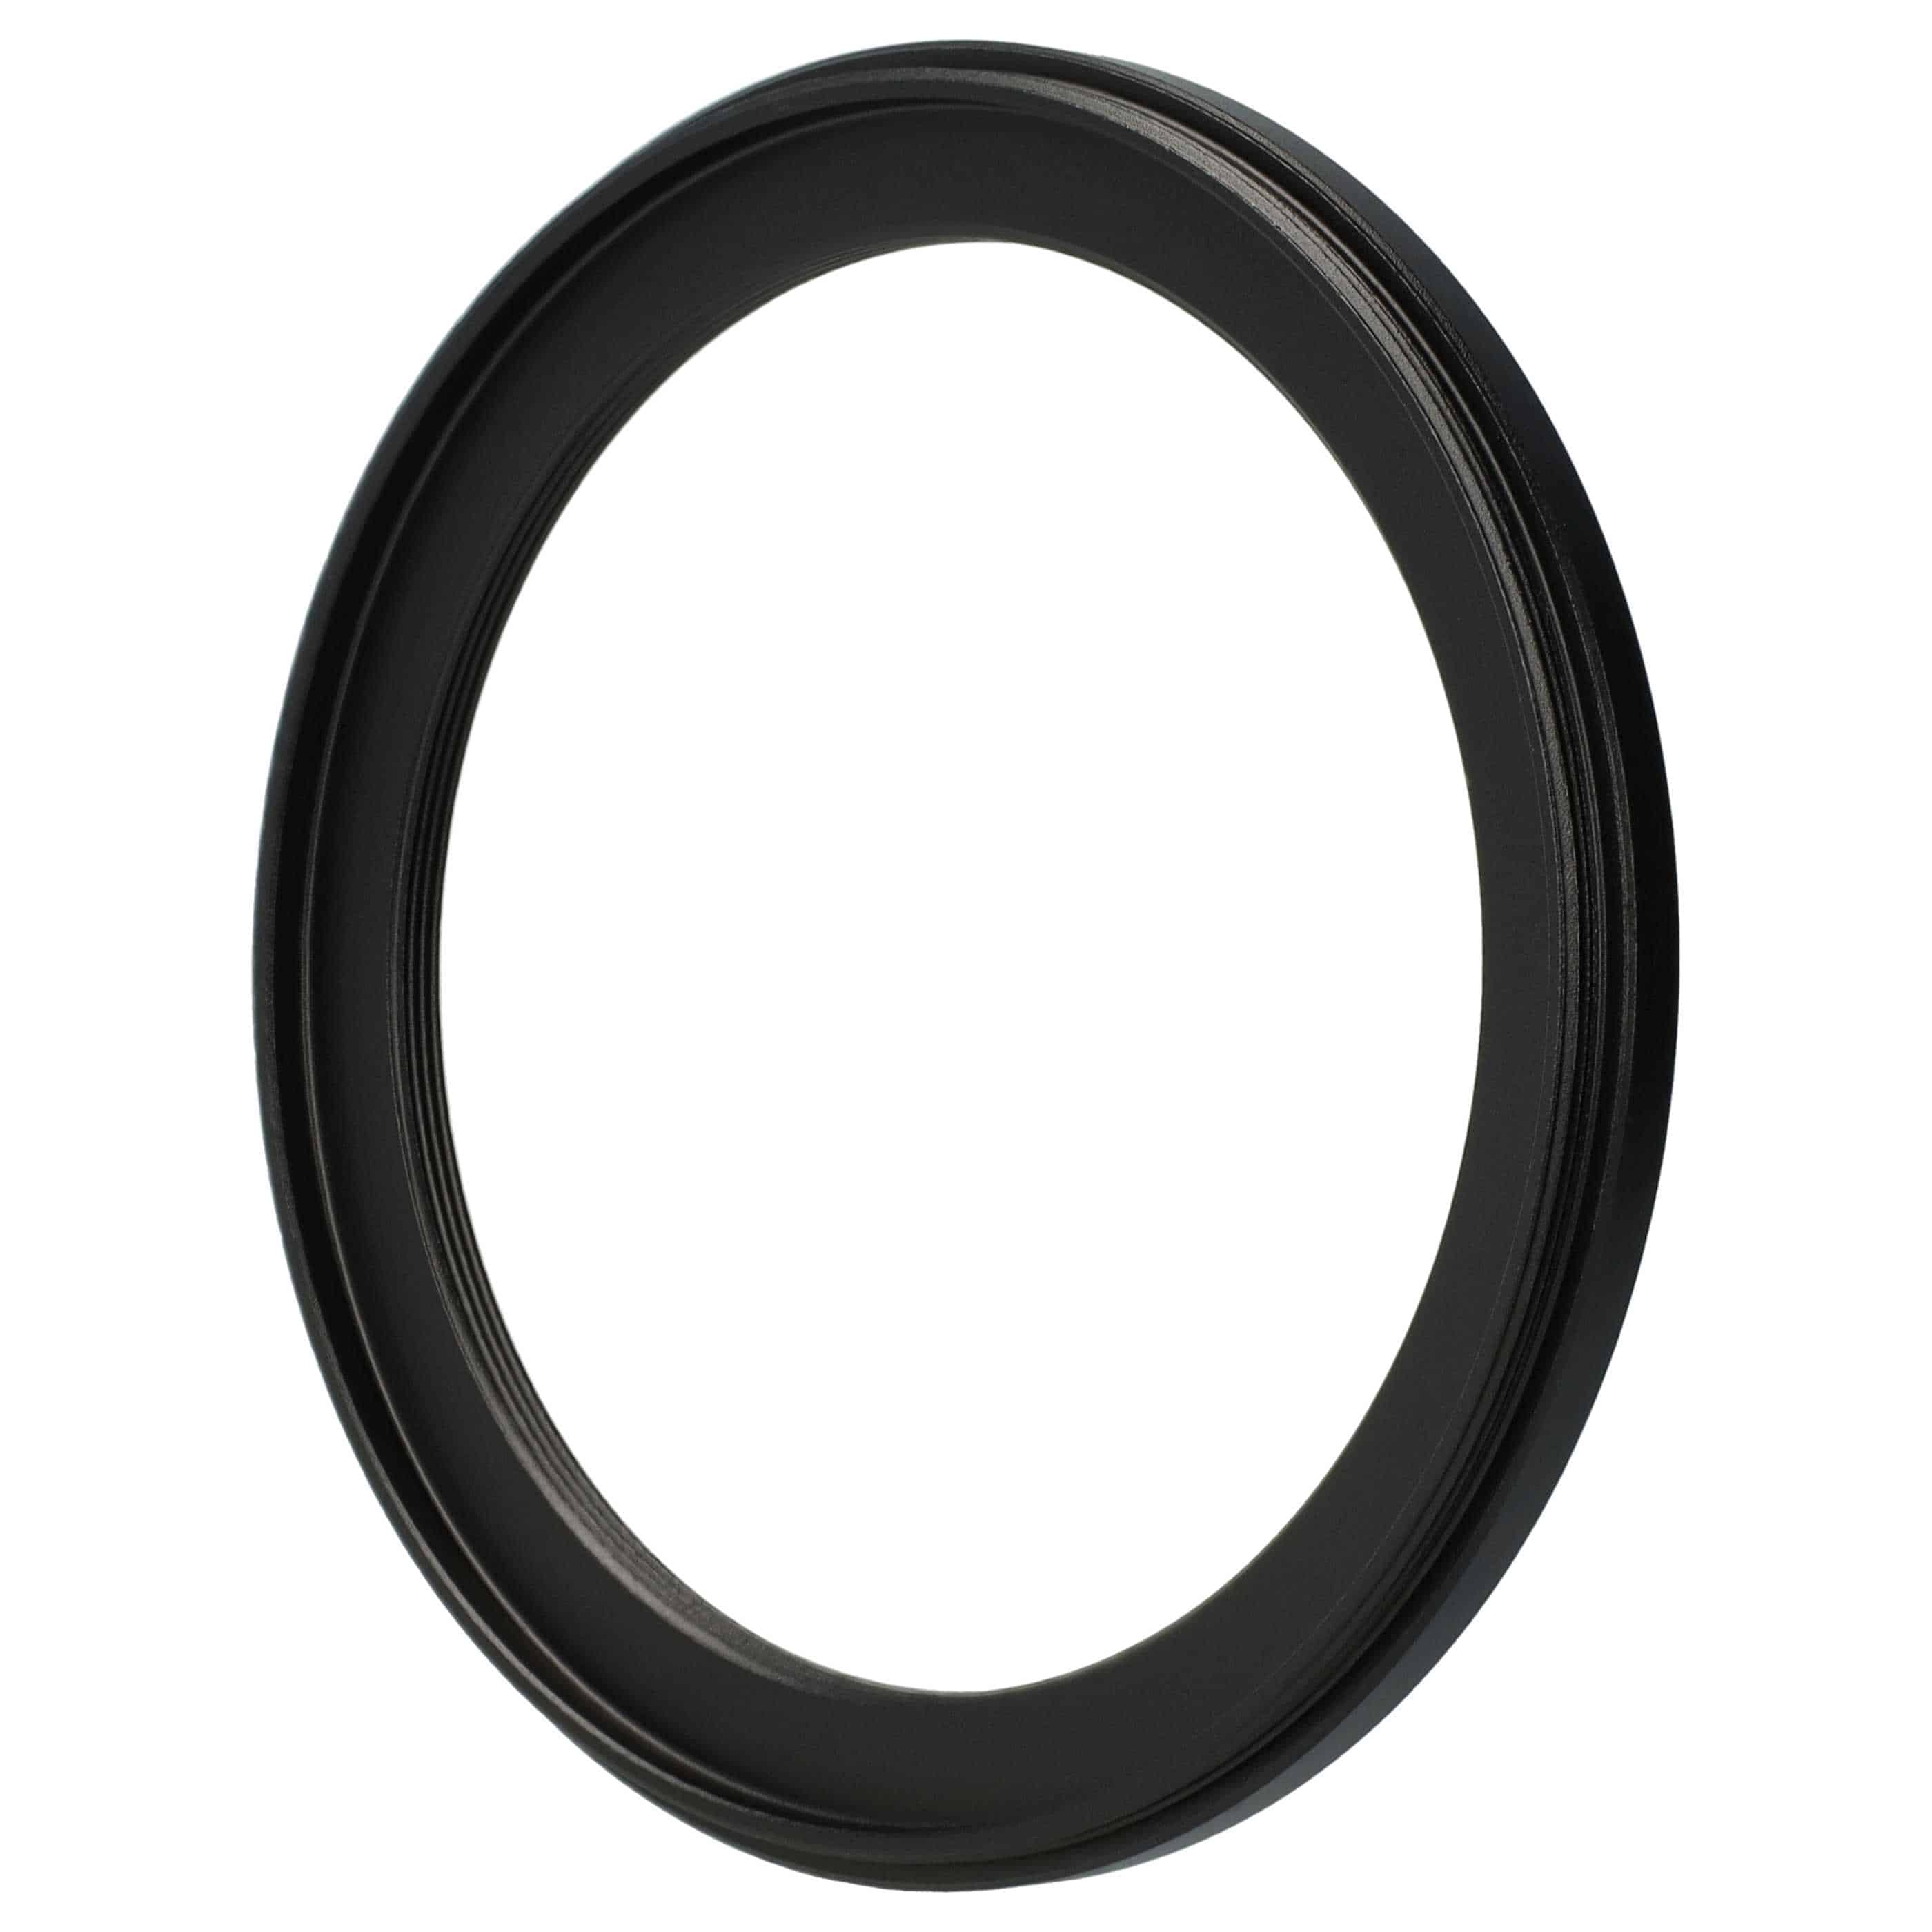 Step-Down Ring Adapter from 82 mm to 67 mm suitable for Camera Lens - Filter Adapter, metal